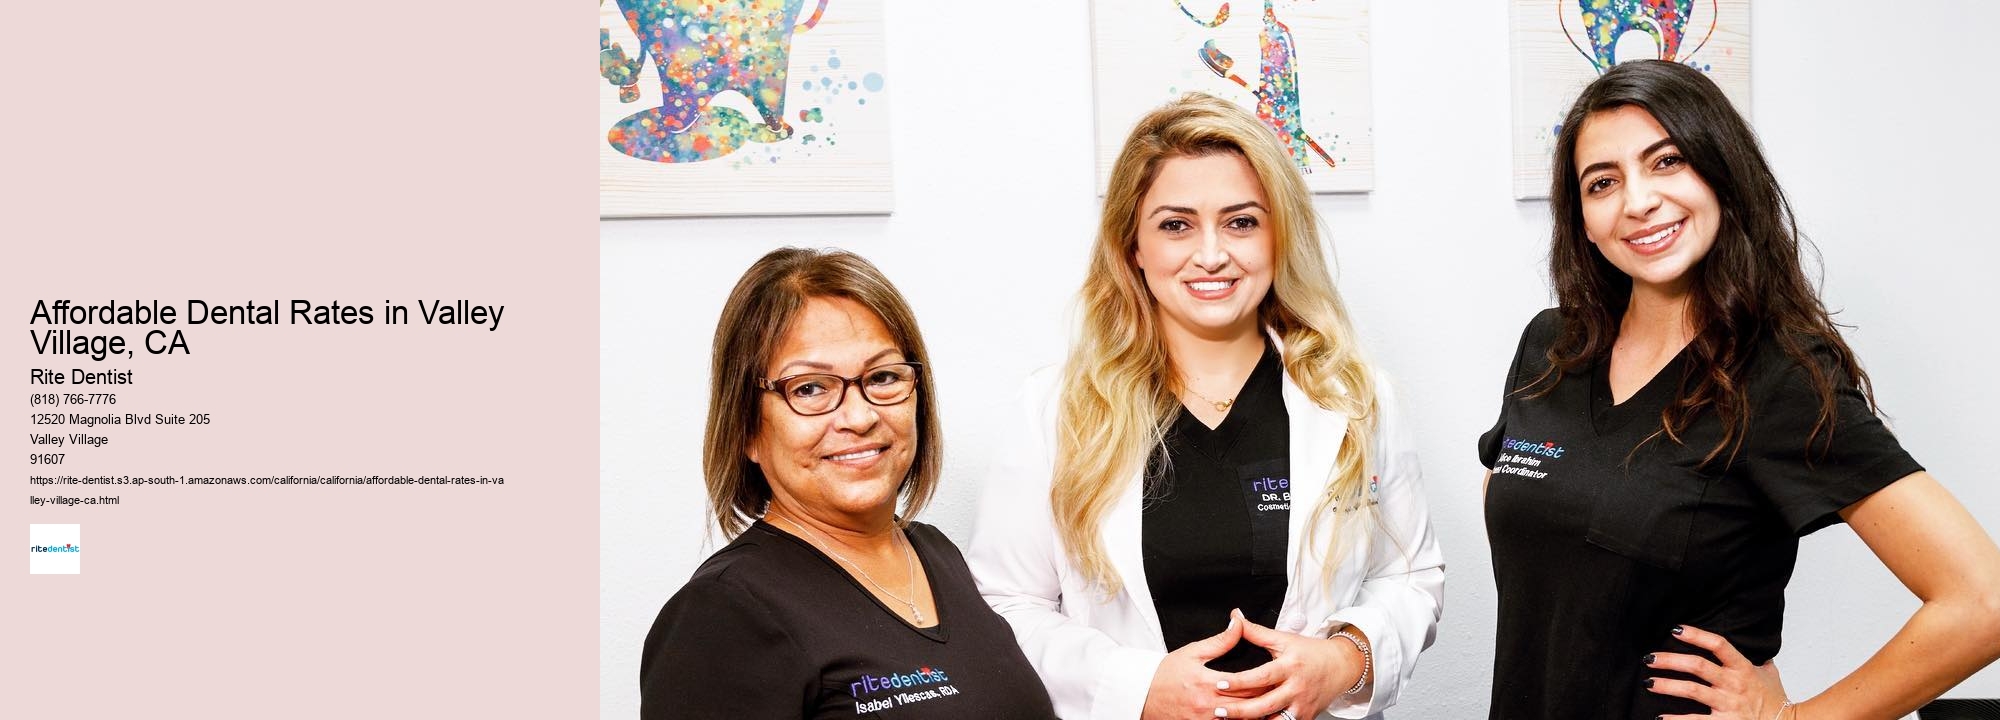 Affordable Dental Rates in Valley Village, CA